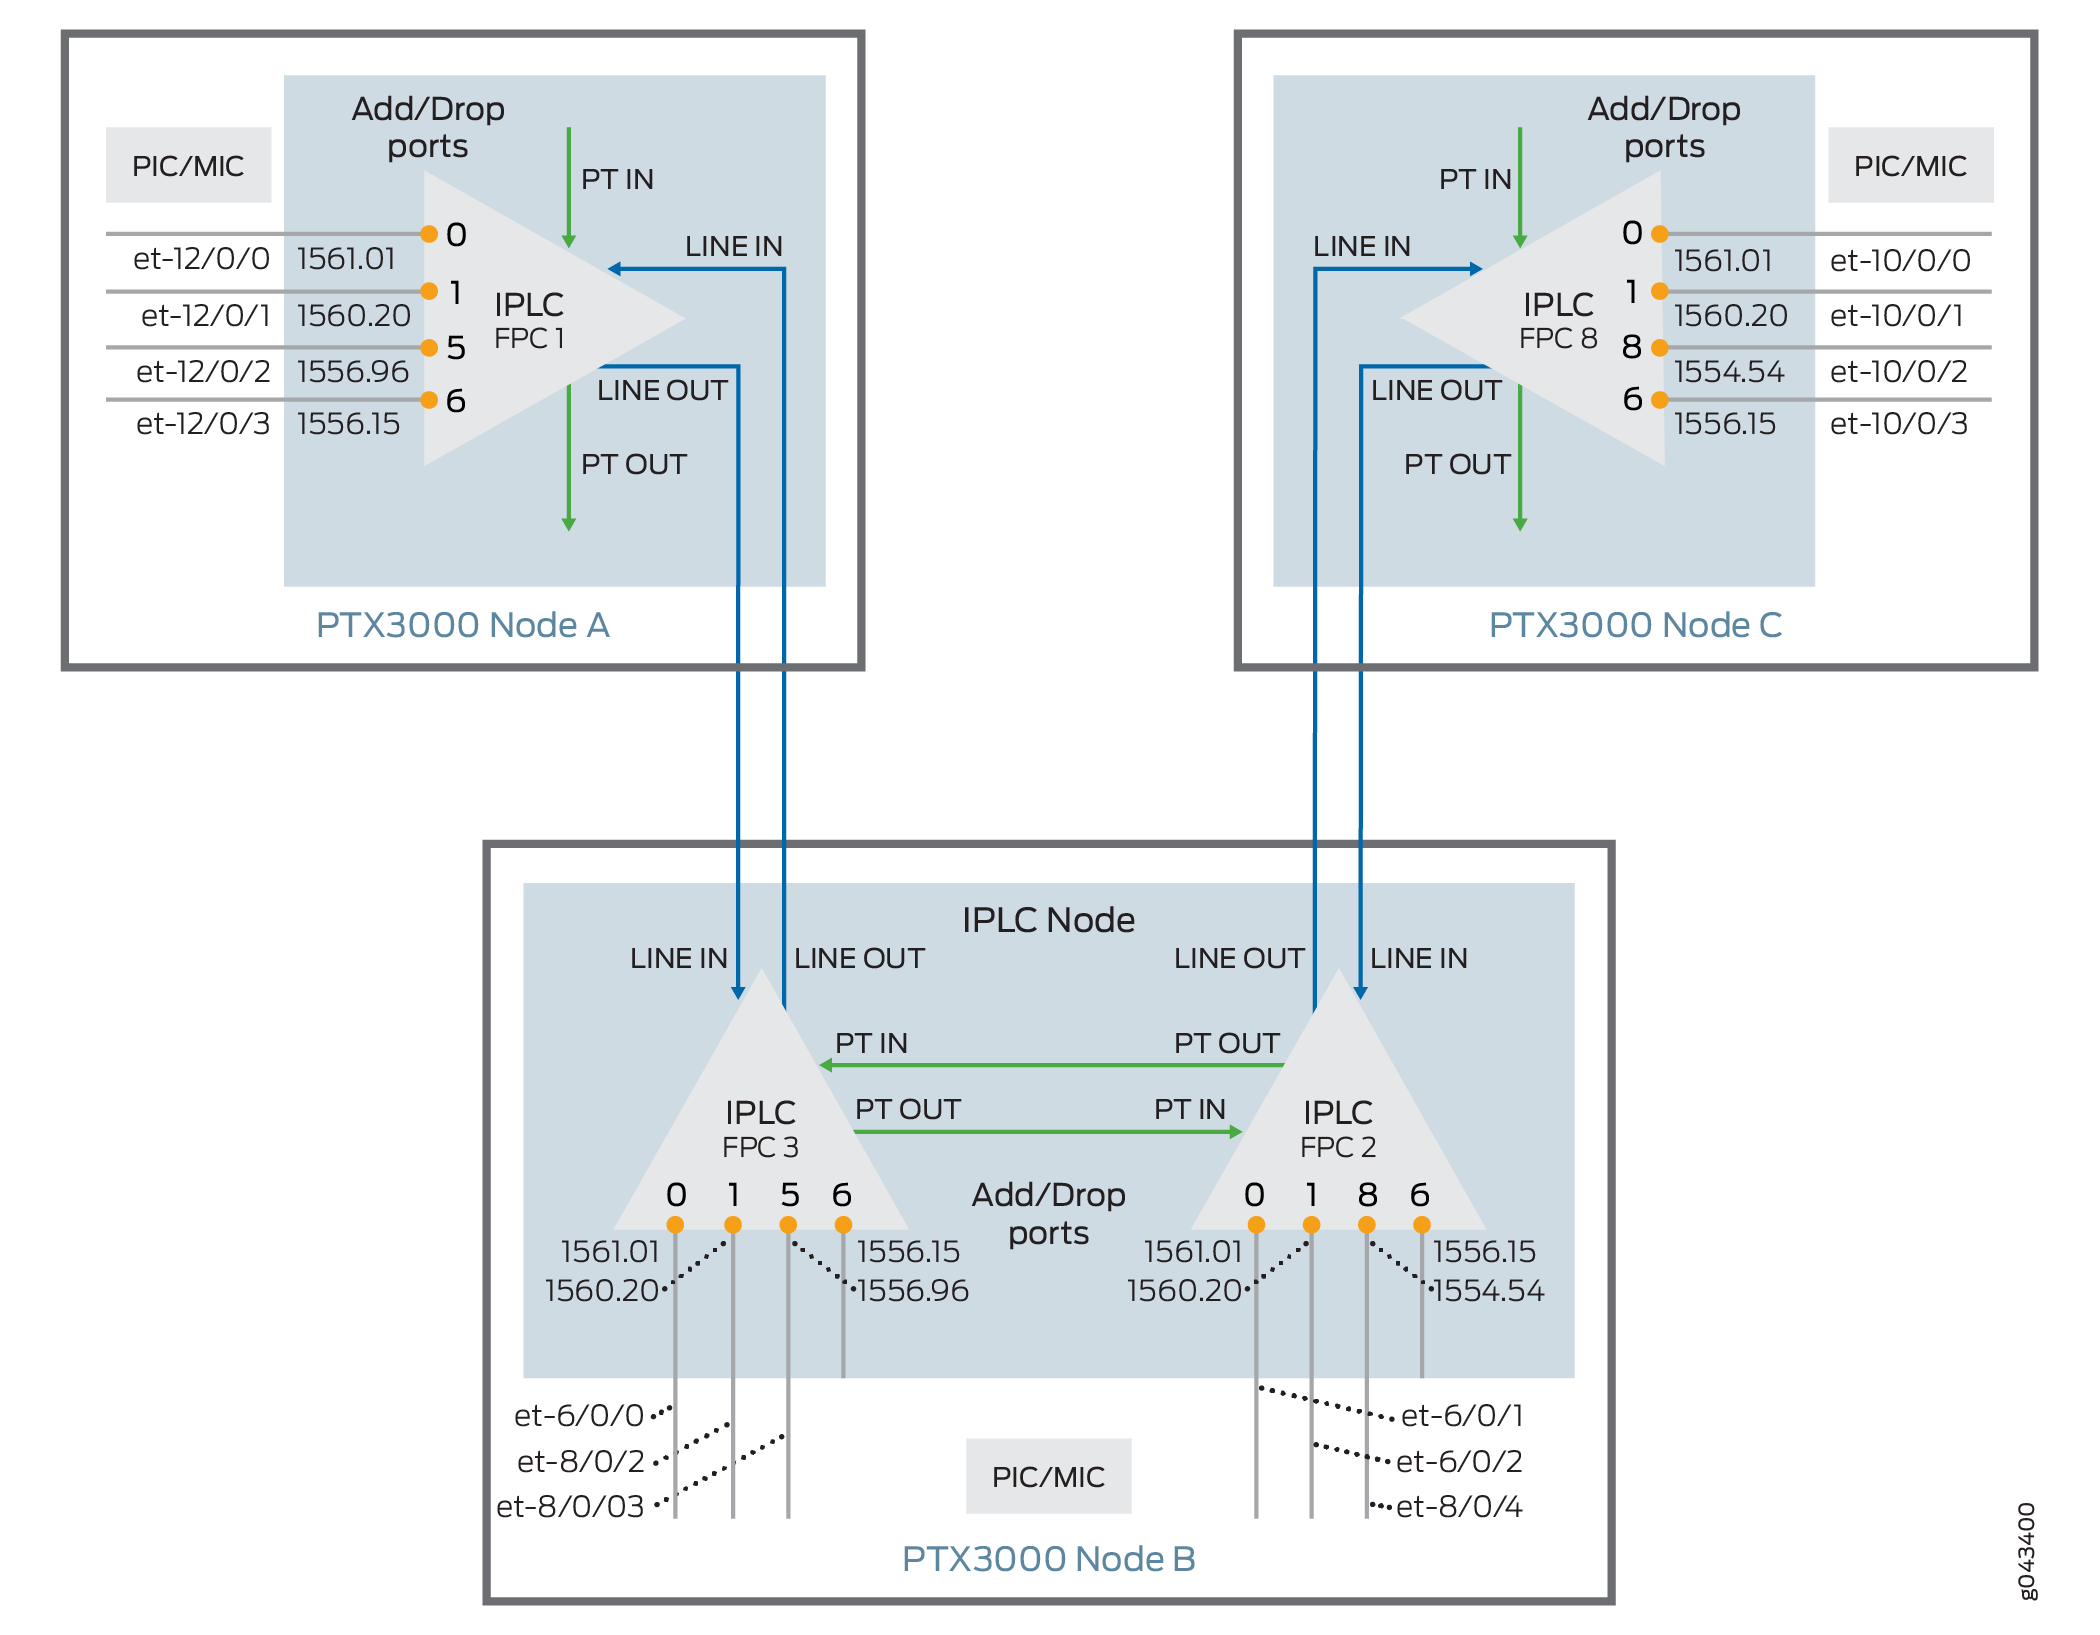 IPLC in Metro Linear Packet
Optical Deployment